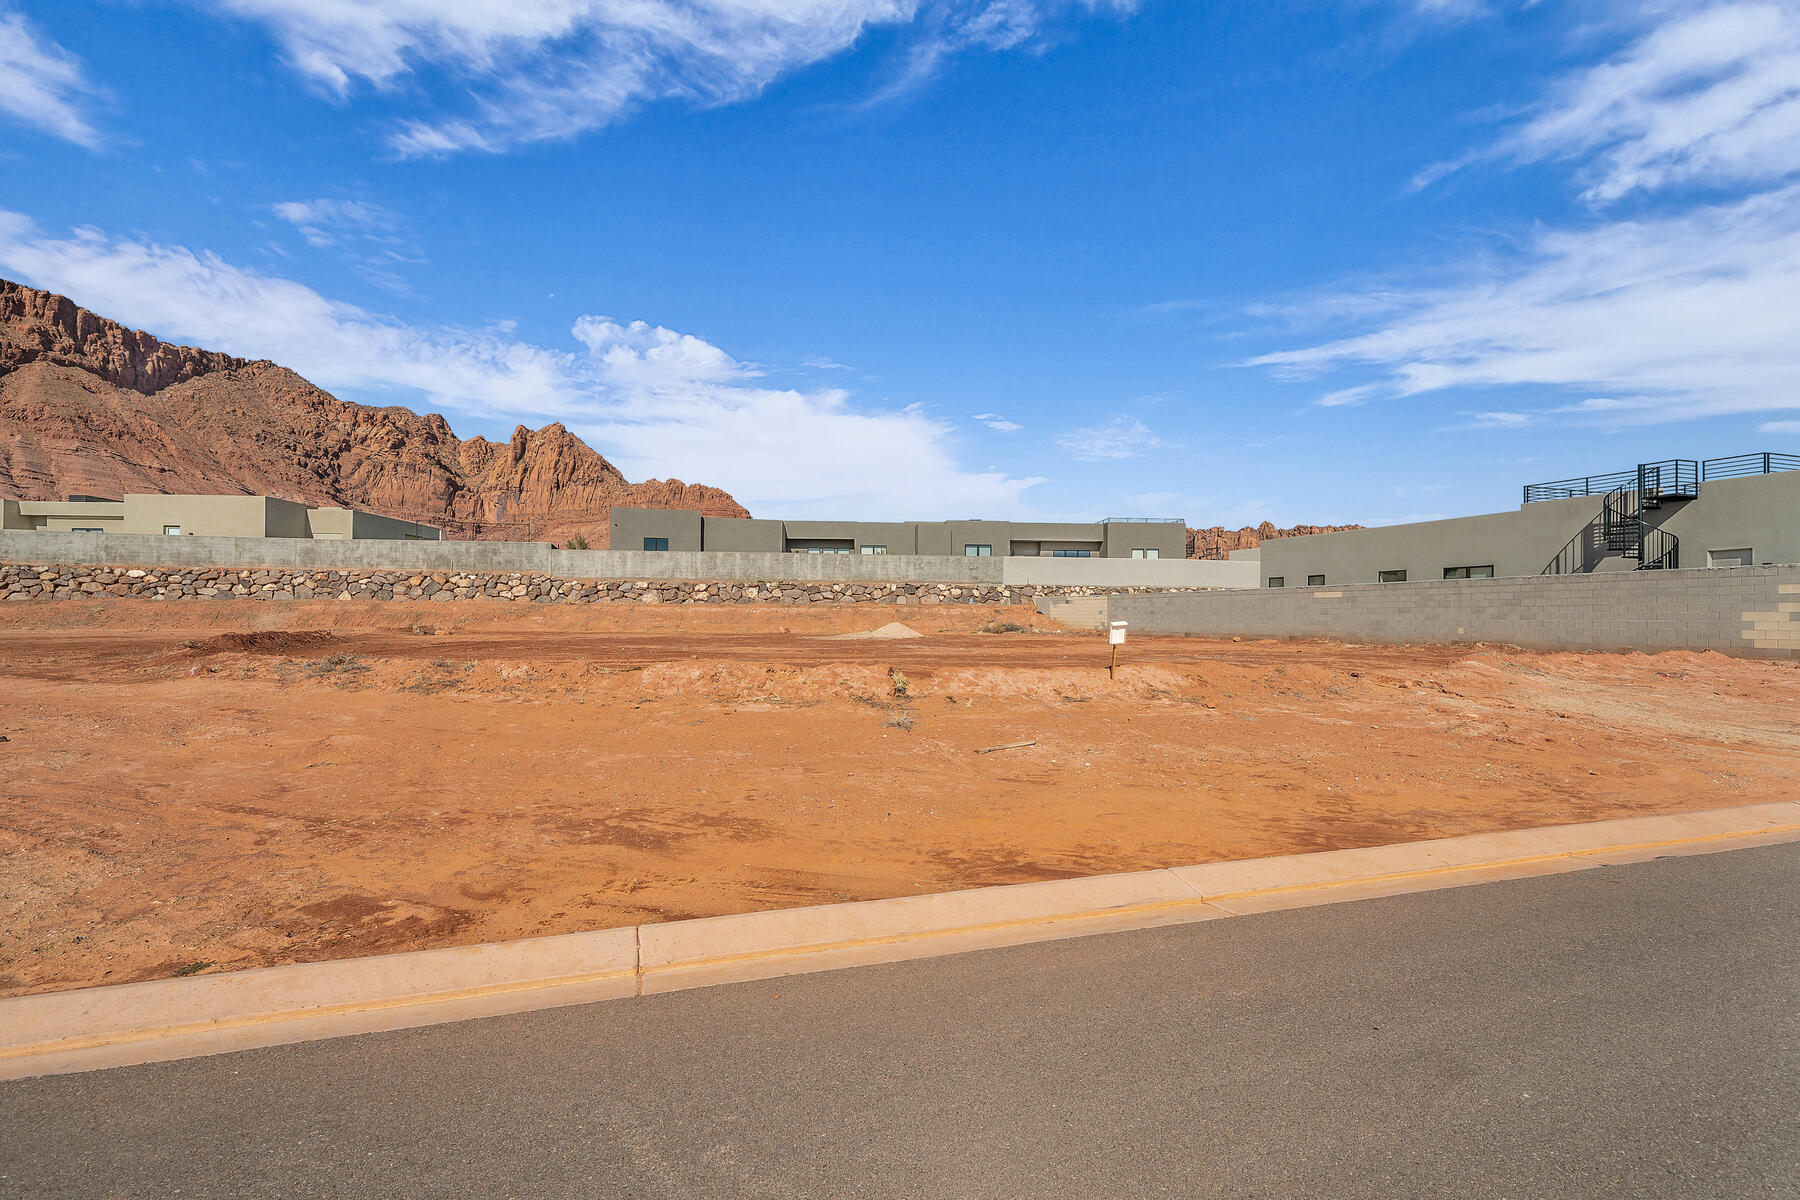 The Gated Community Of The Palisades Of Snow Canyon